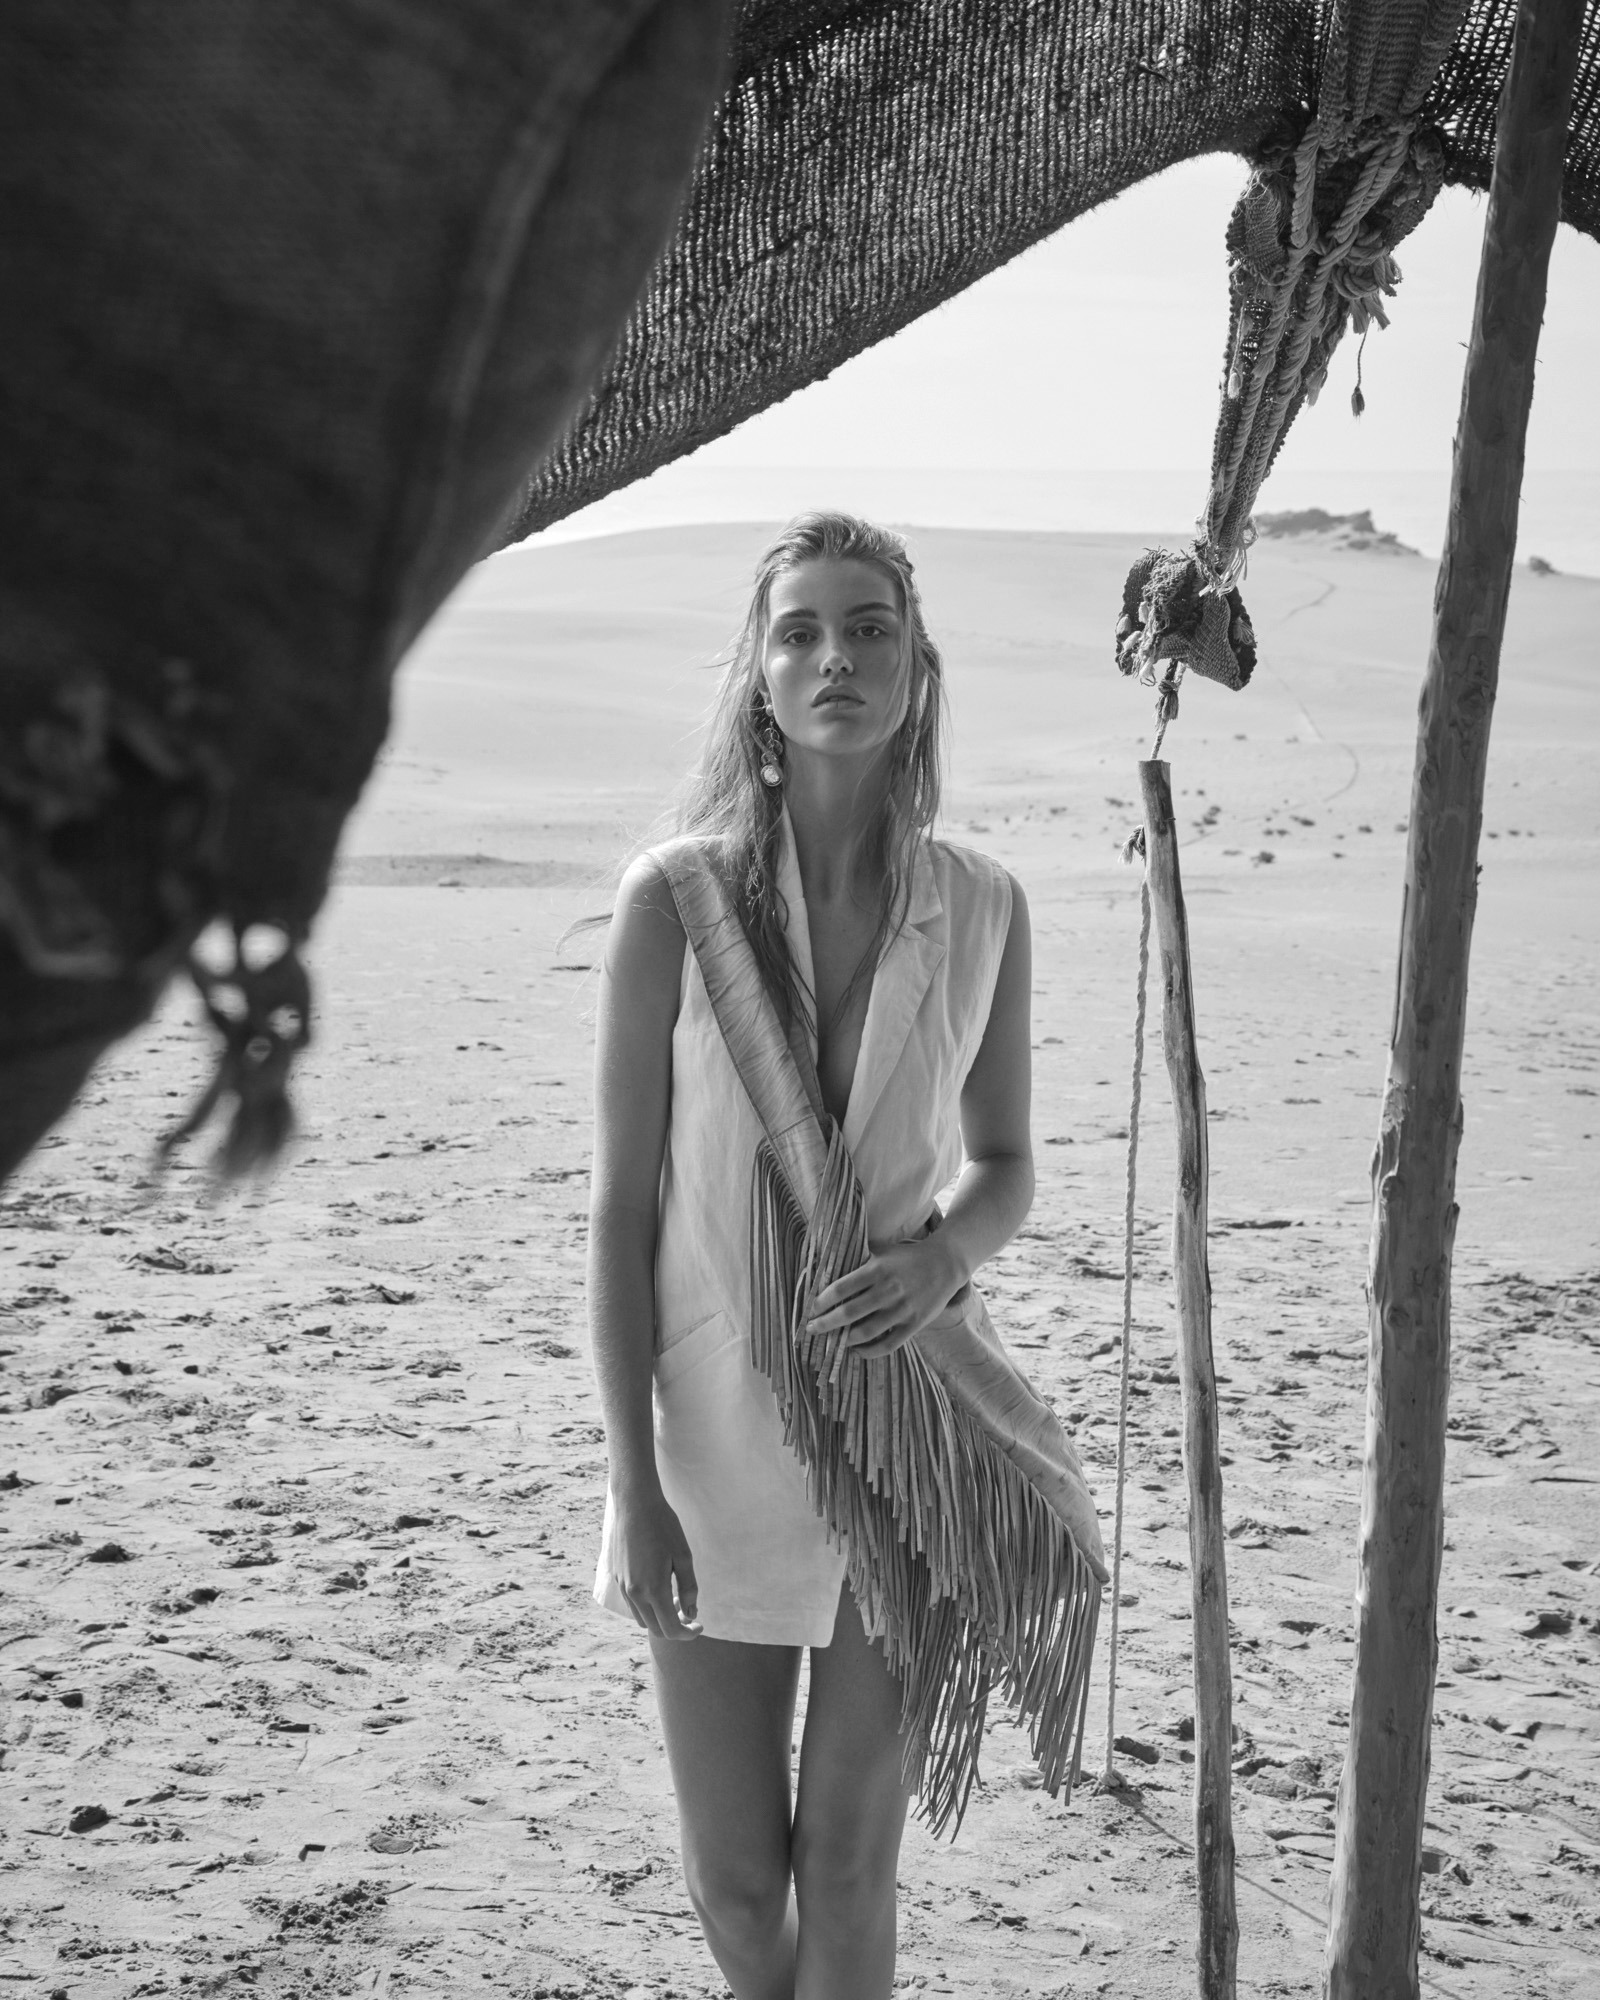 Free People 8 by Andreas ORTNER